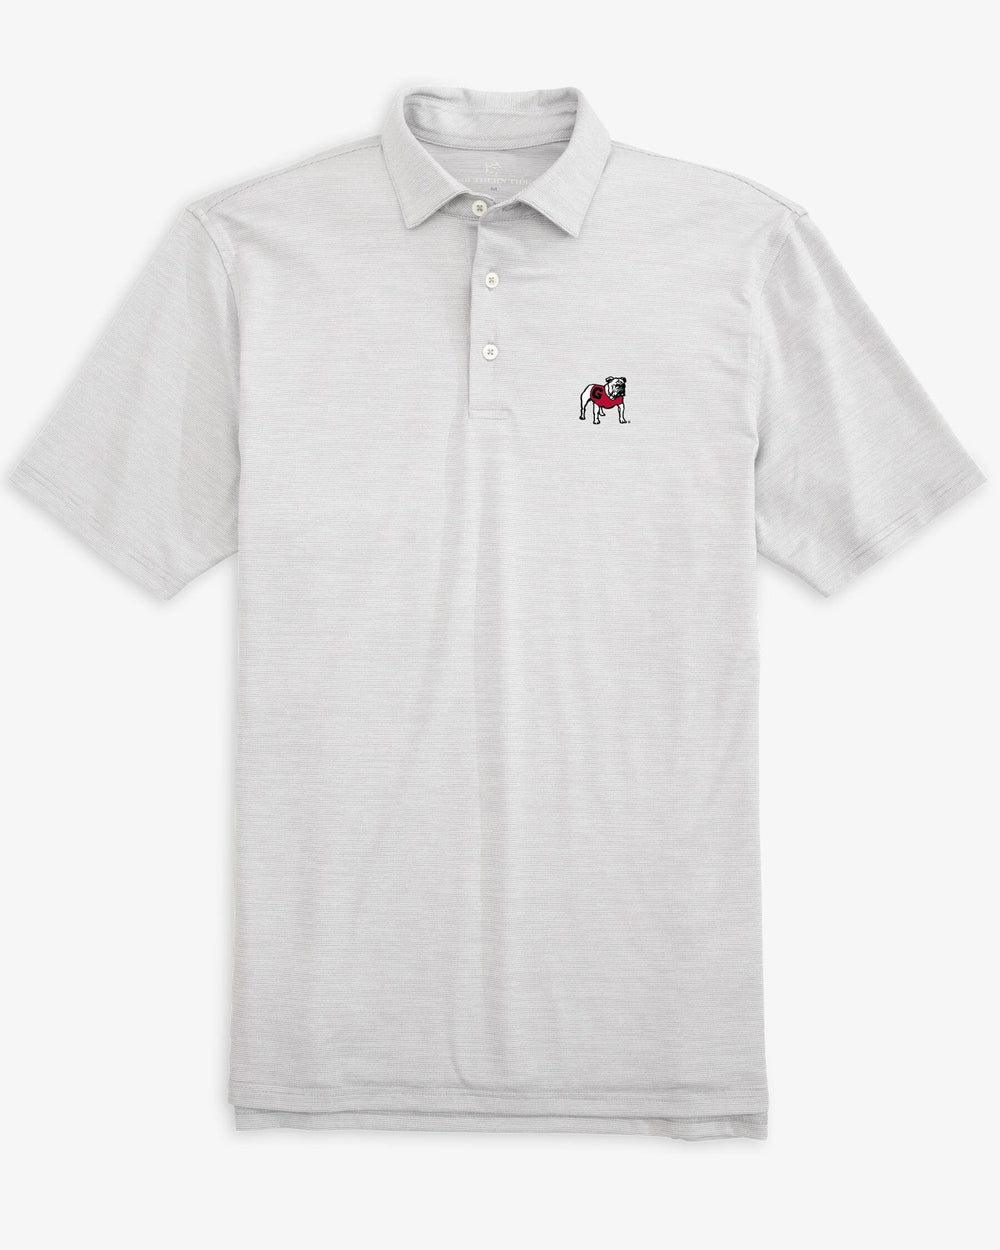 The front view of the Georgia Bulldogs Driver Spacedye Polo Shirt by Southern Tide - Slate Grey